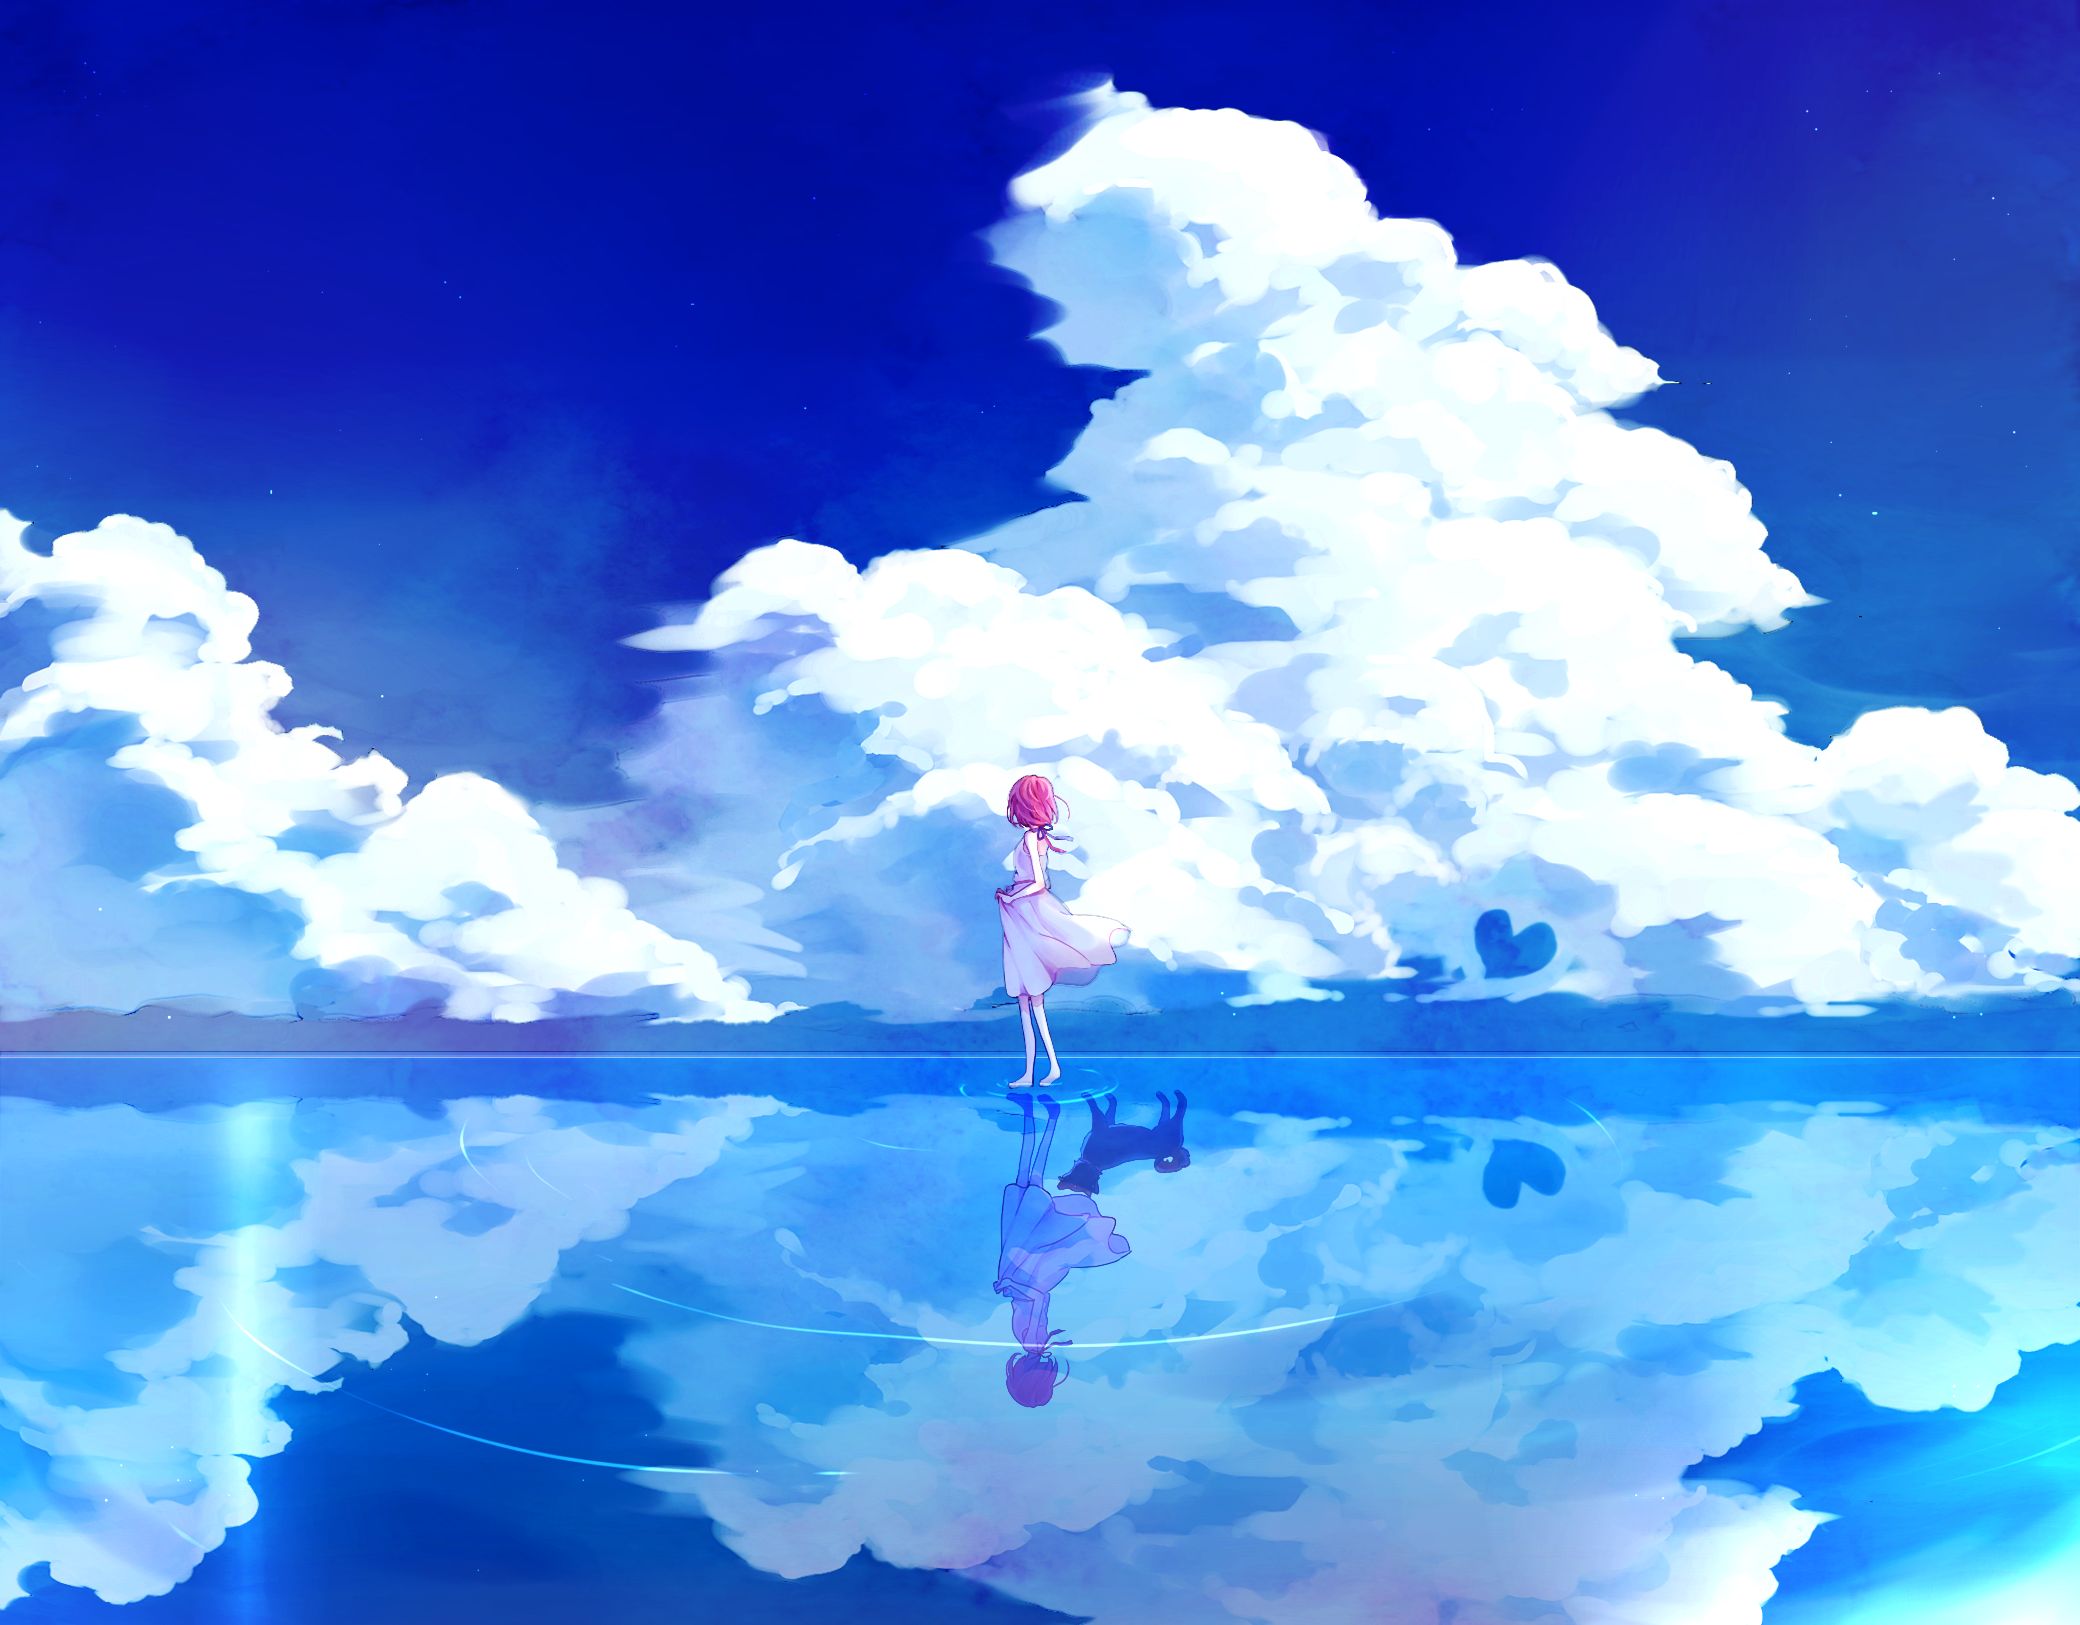 Anime Clouds Stock Photos Images and Backgrounds for Free Download